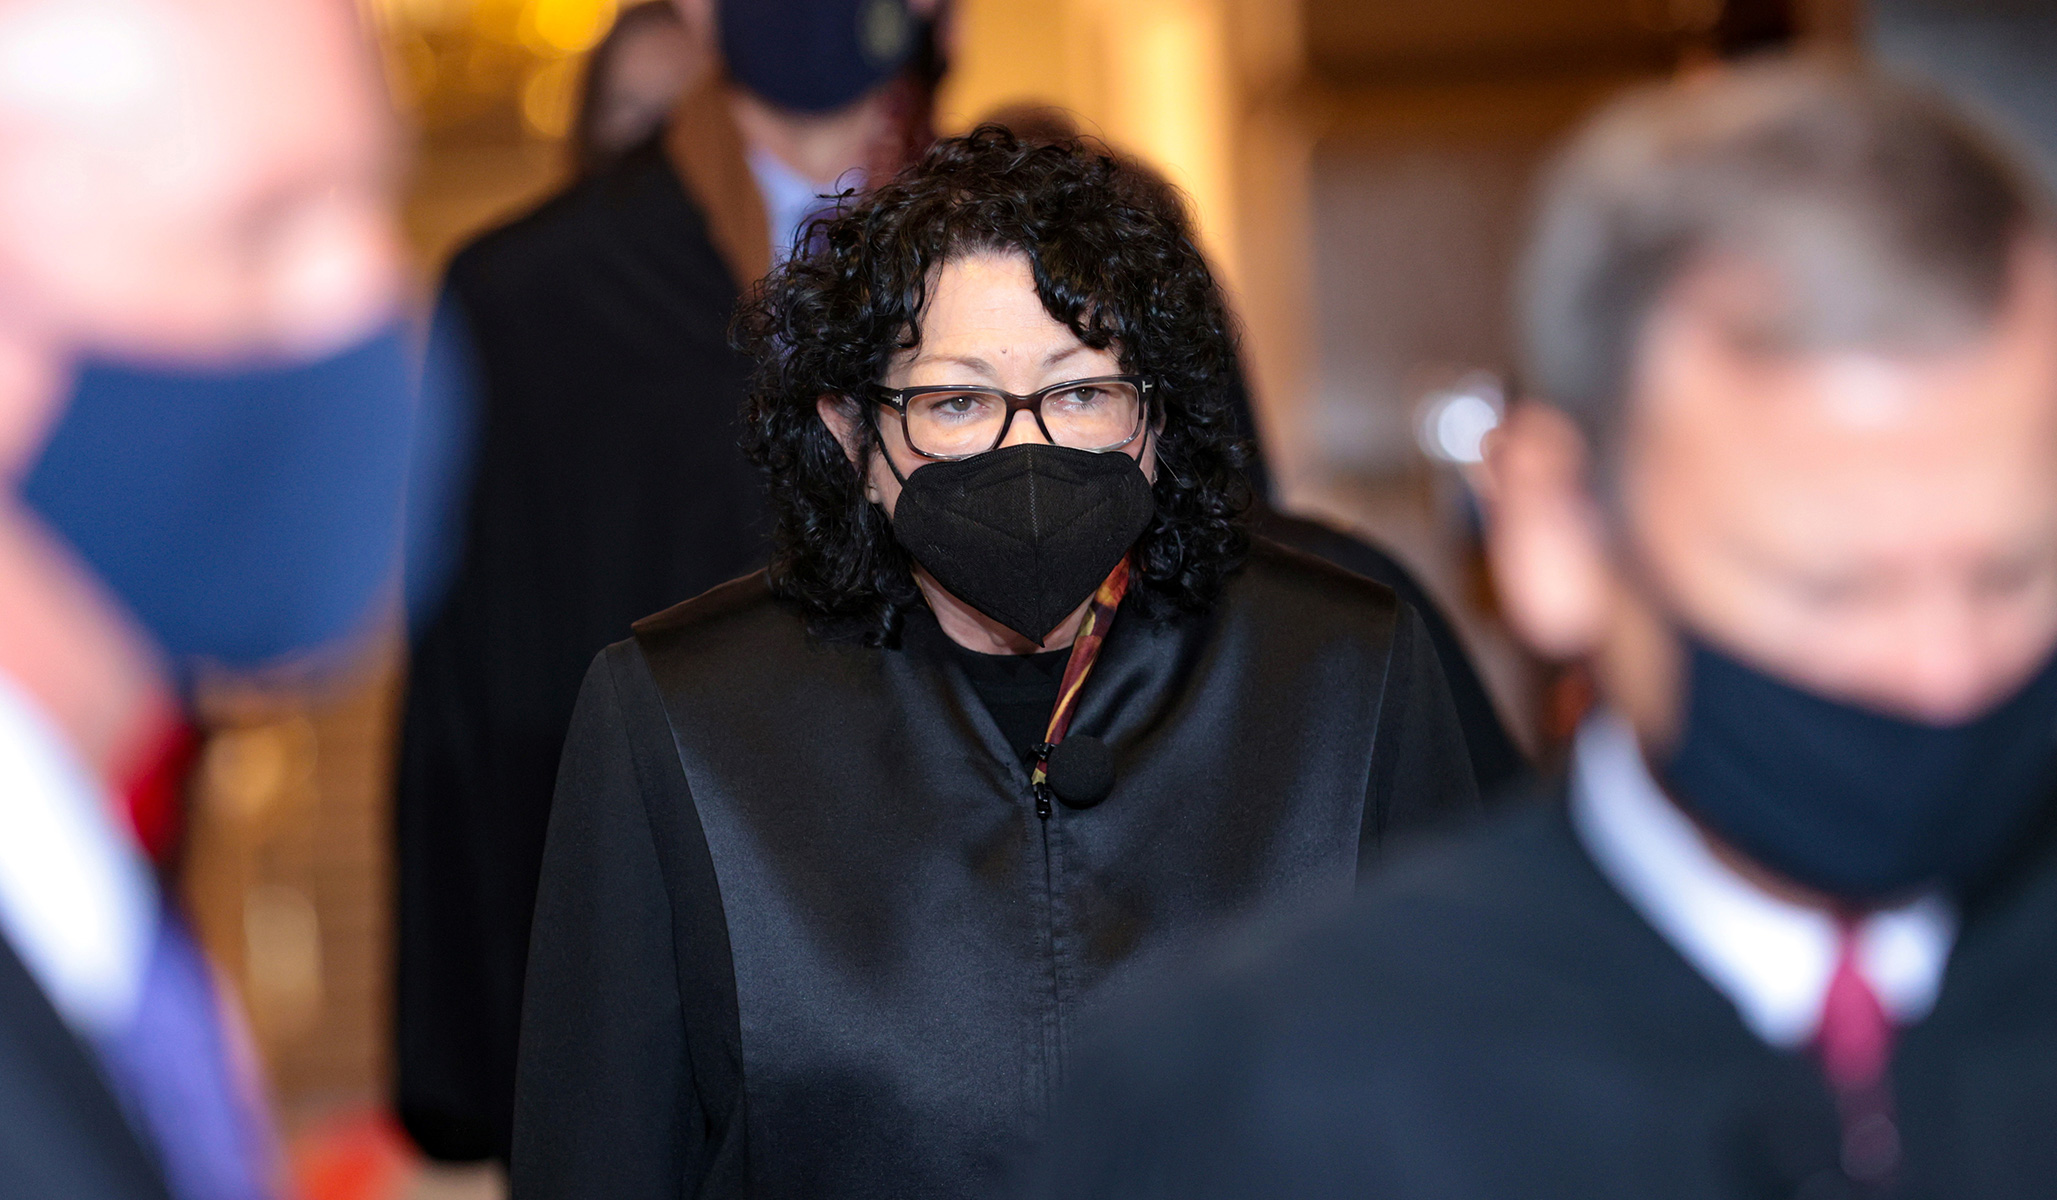 Sotomayor Fact-Checked: Justice Gets Four Pinocchios for 'Wildly Incorrect' Covid Claim